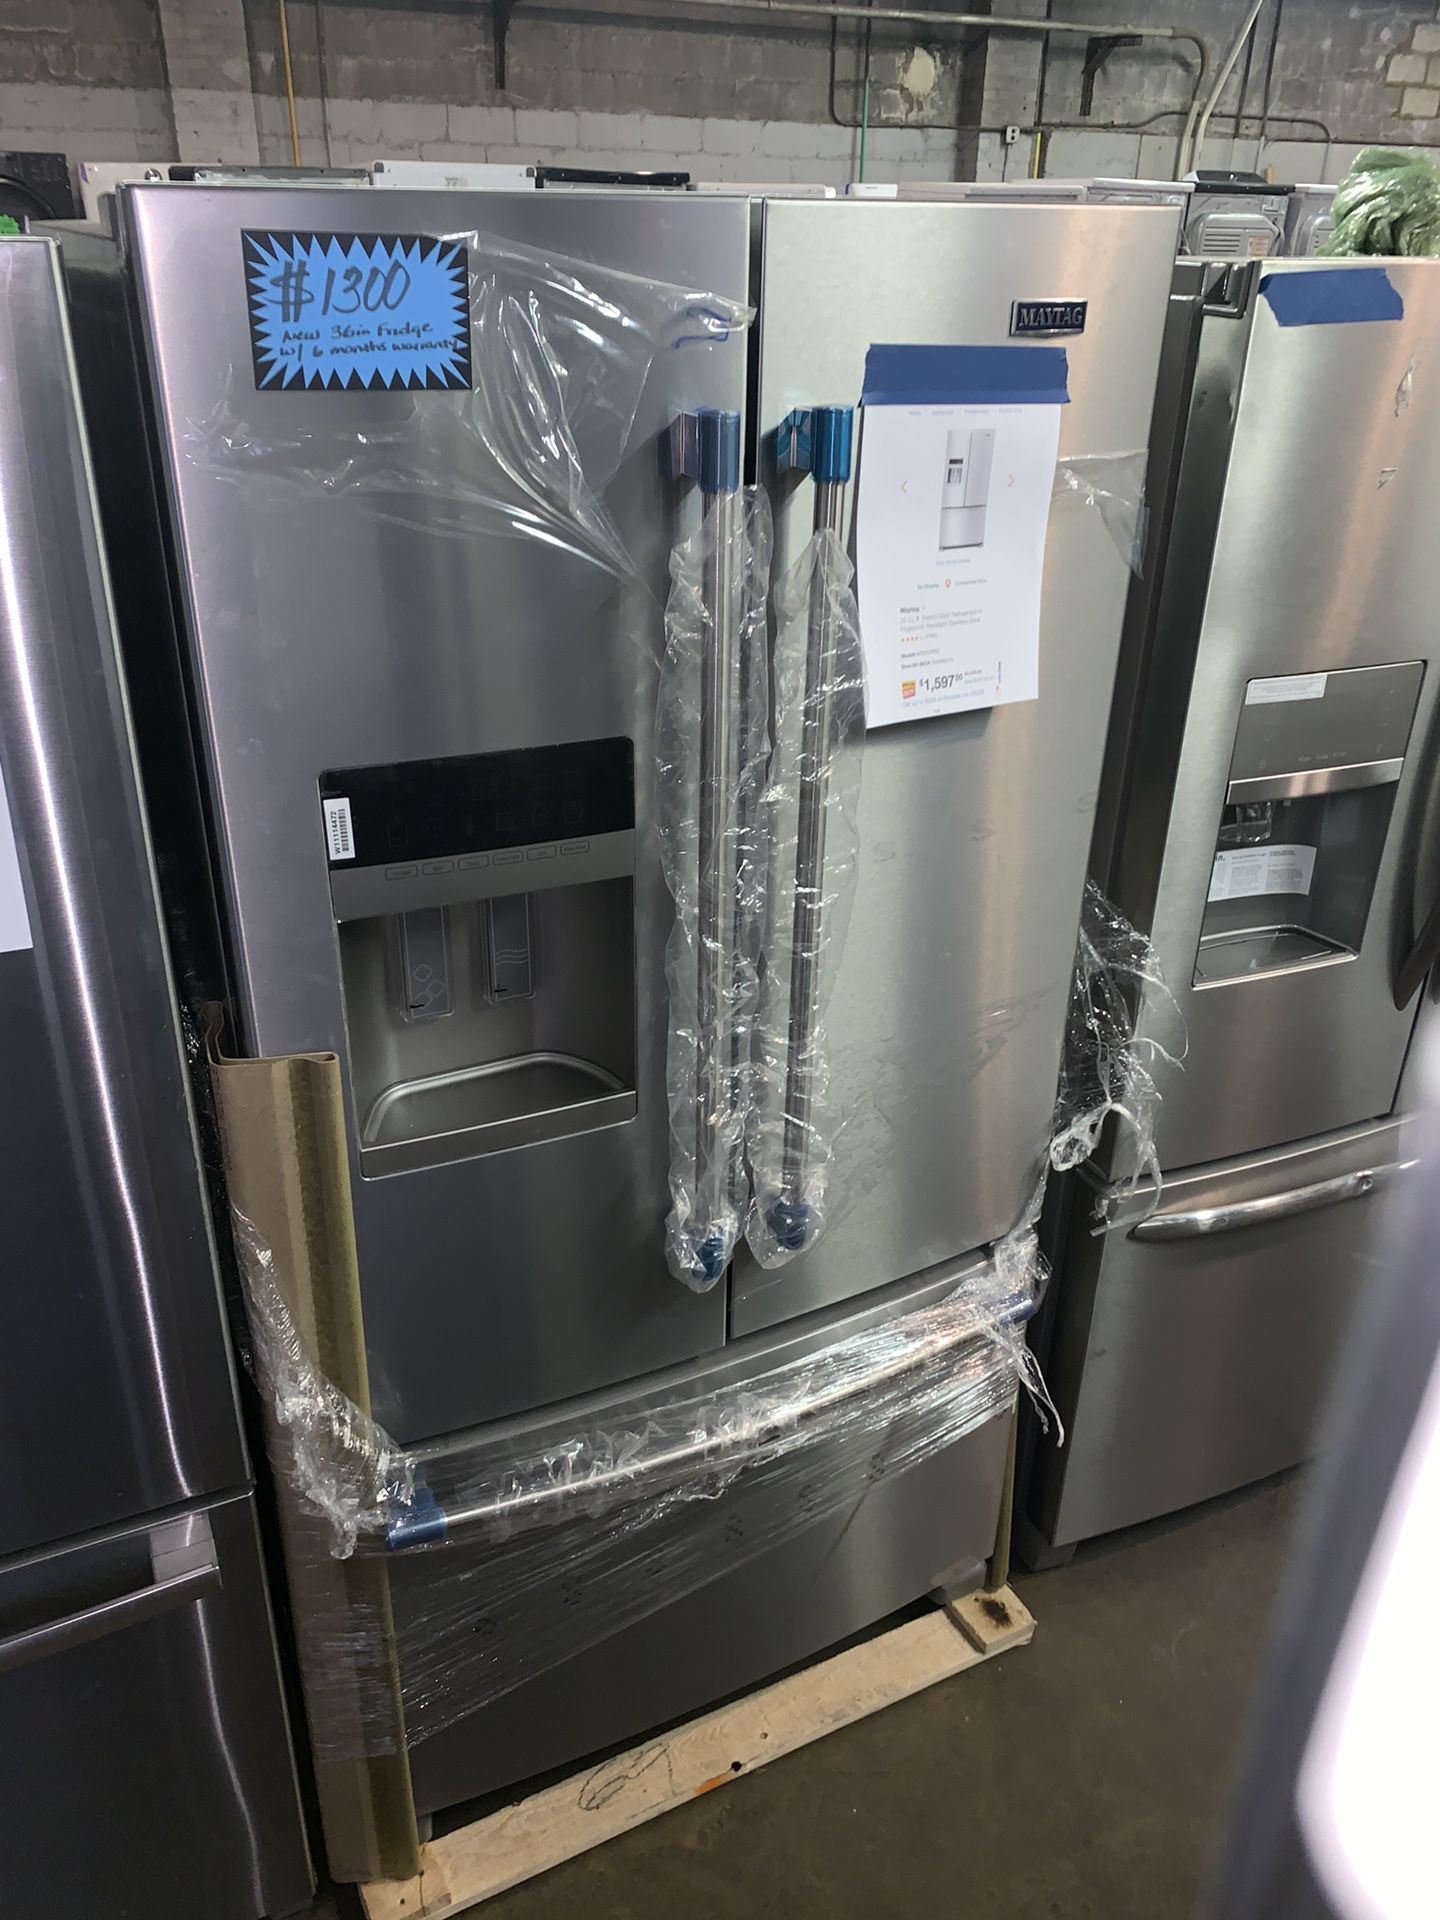 Brand new MAYTAG 36in. Stainless steel french doors refrigerator with 6 months warranty